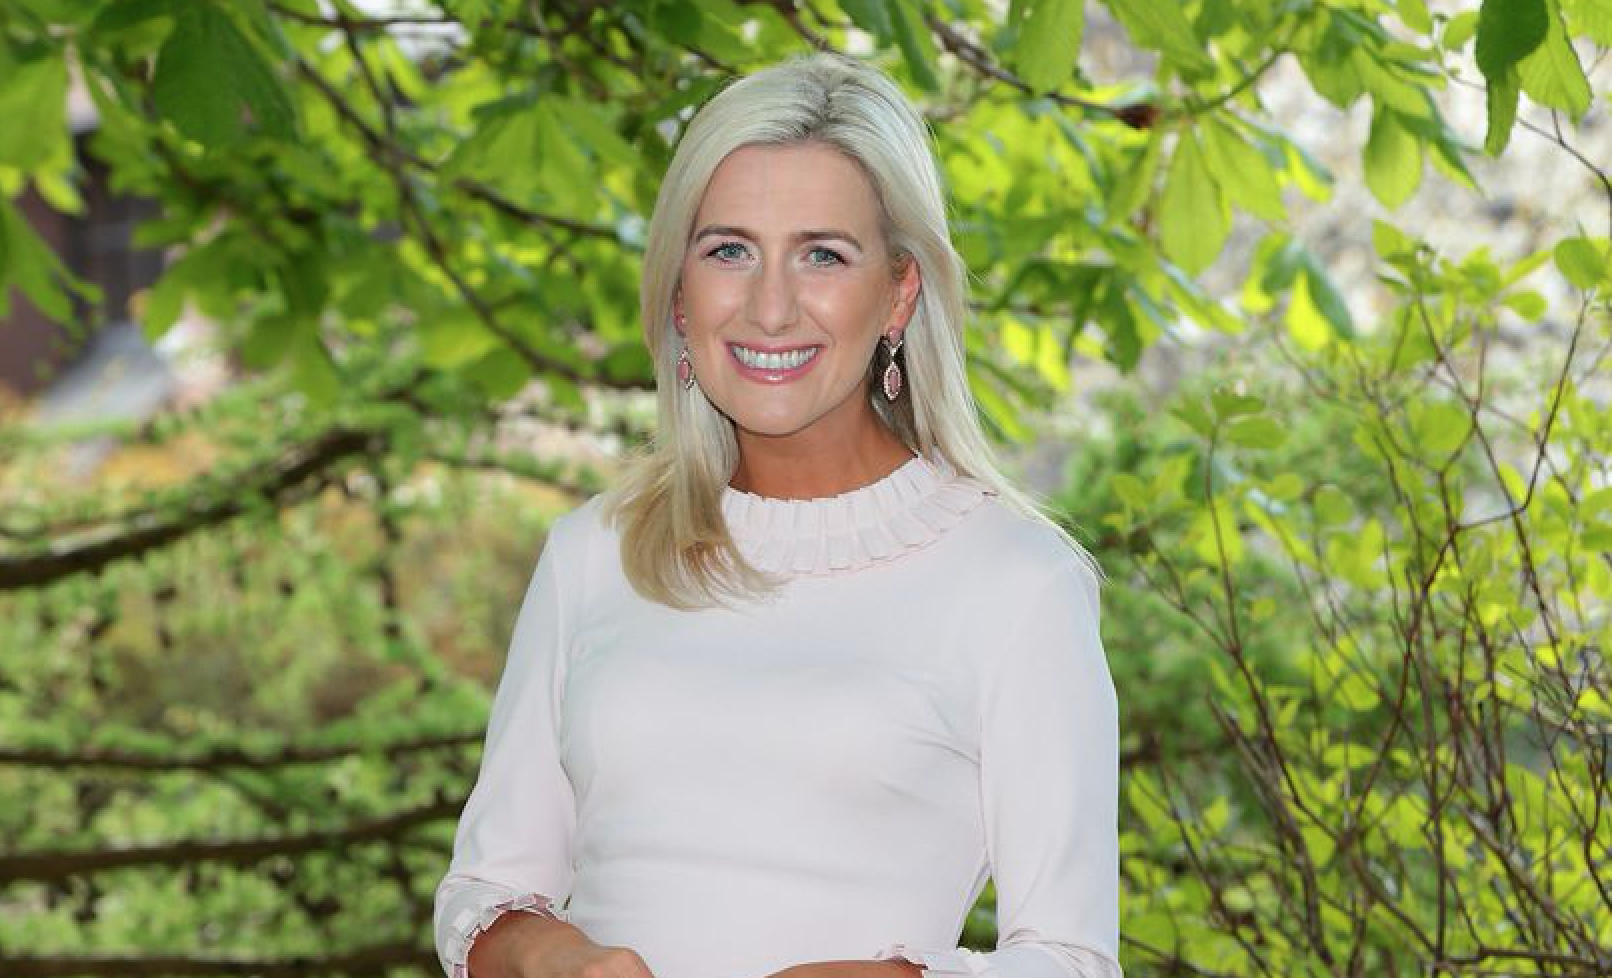 TV3’s Ciara Doherty announces live on air that she’s pregnant